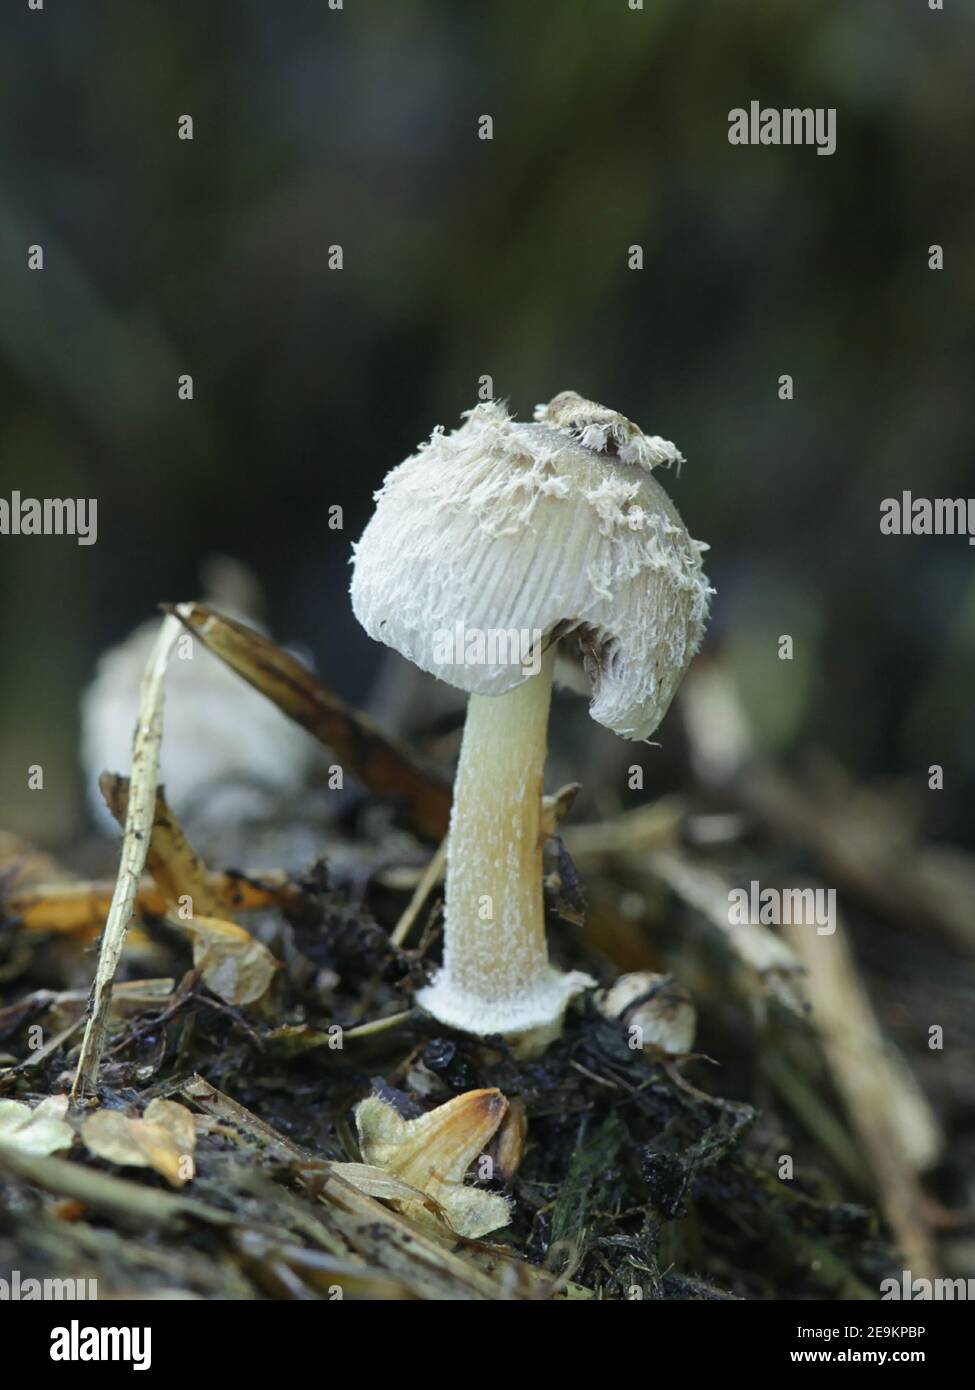 Coprinus sterquilinus, known as the midden inkcap, wild mushroom growing on horse dung from Finland Stock Photo